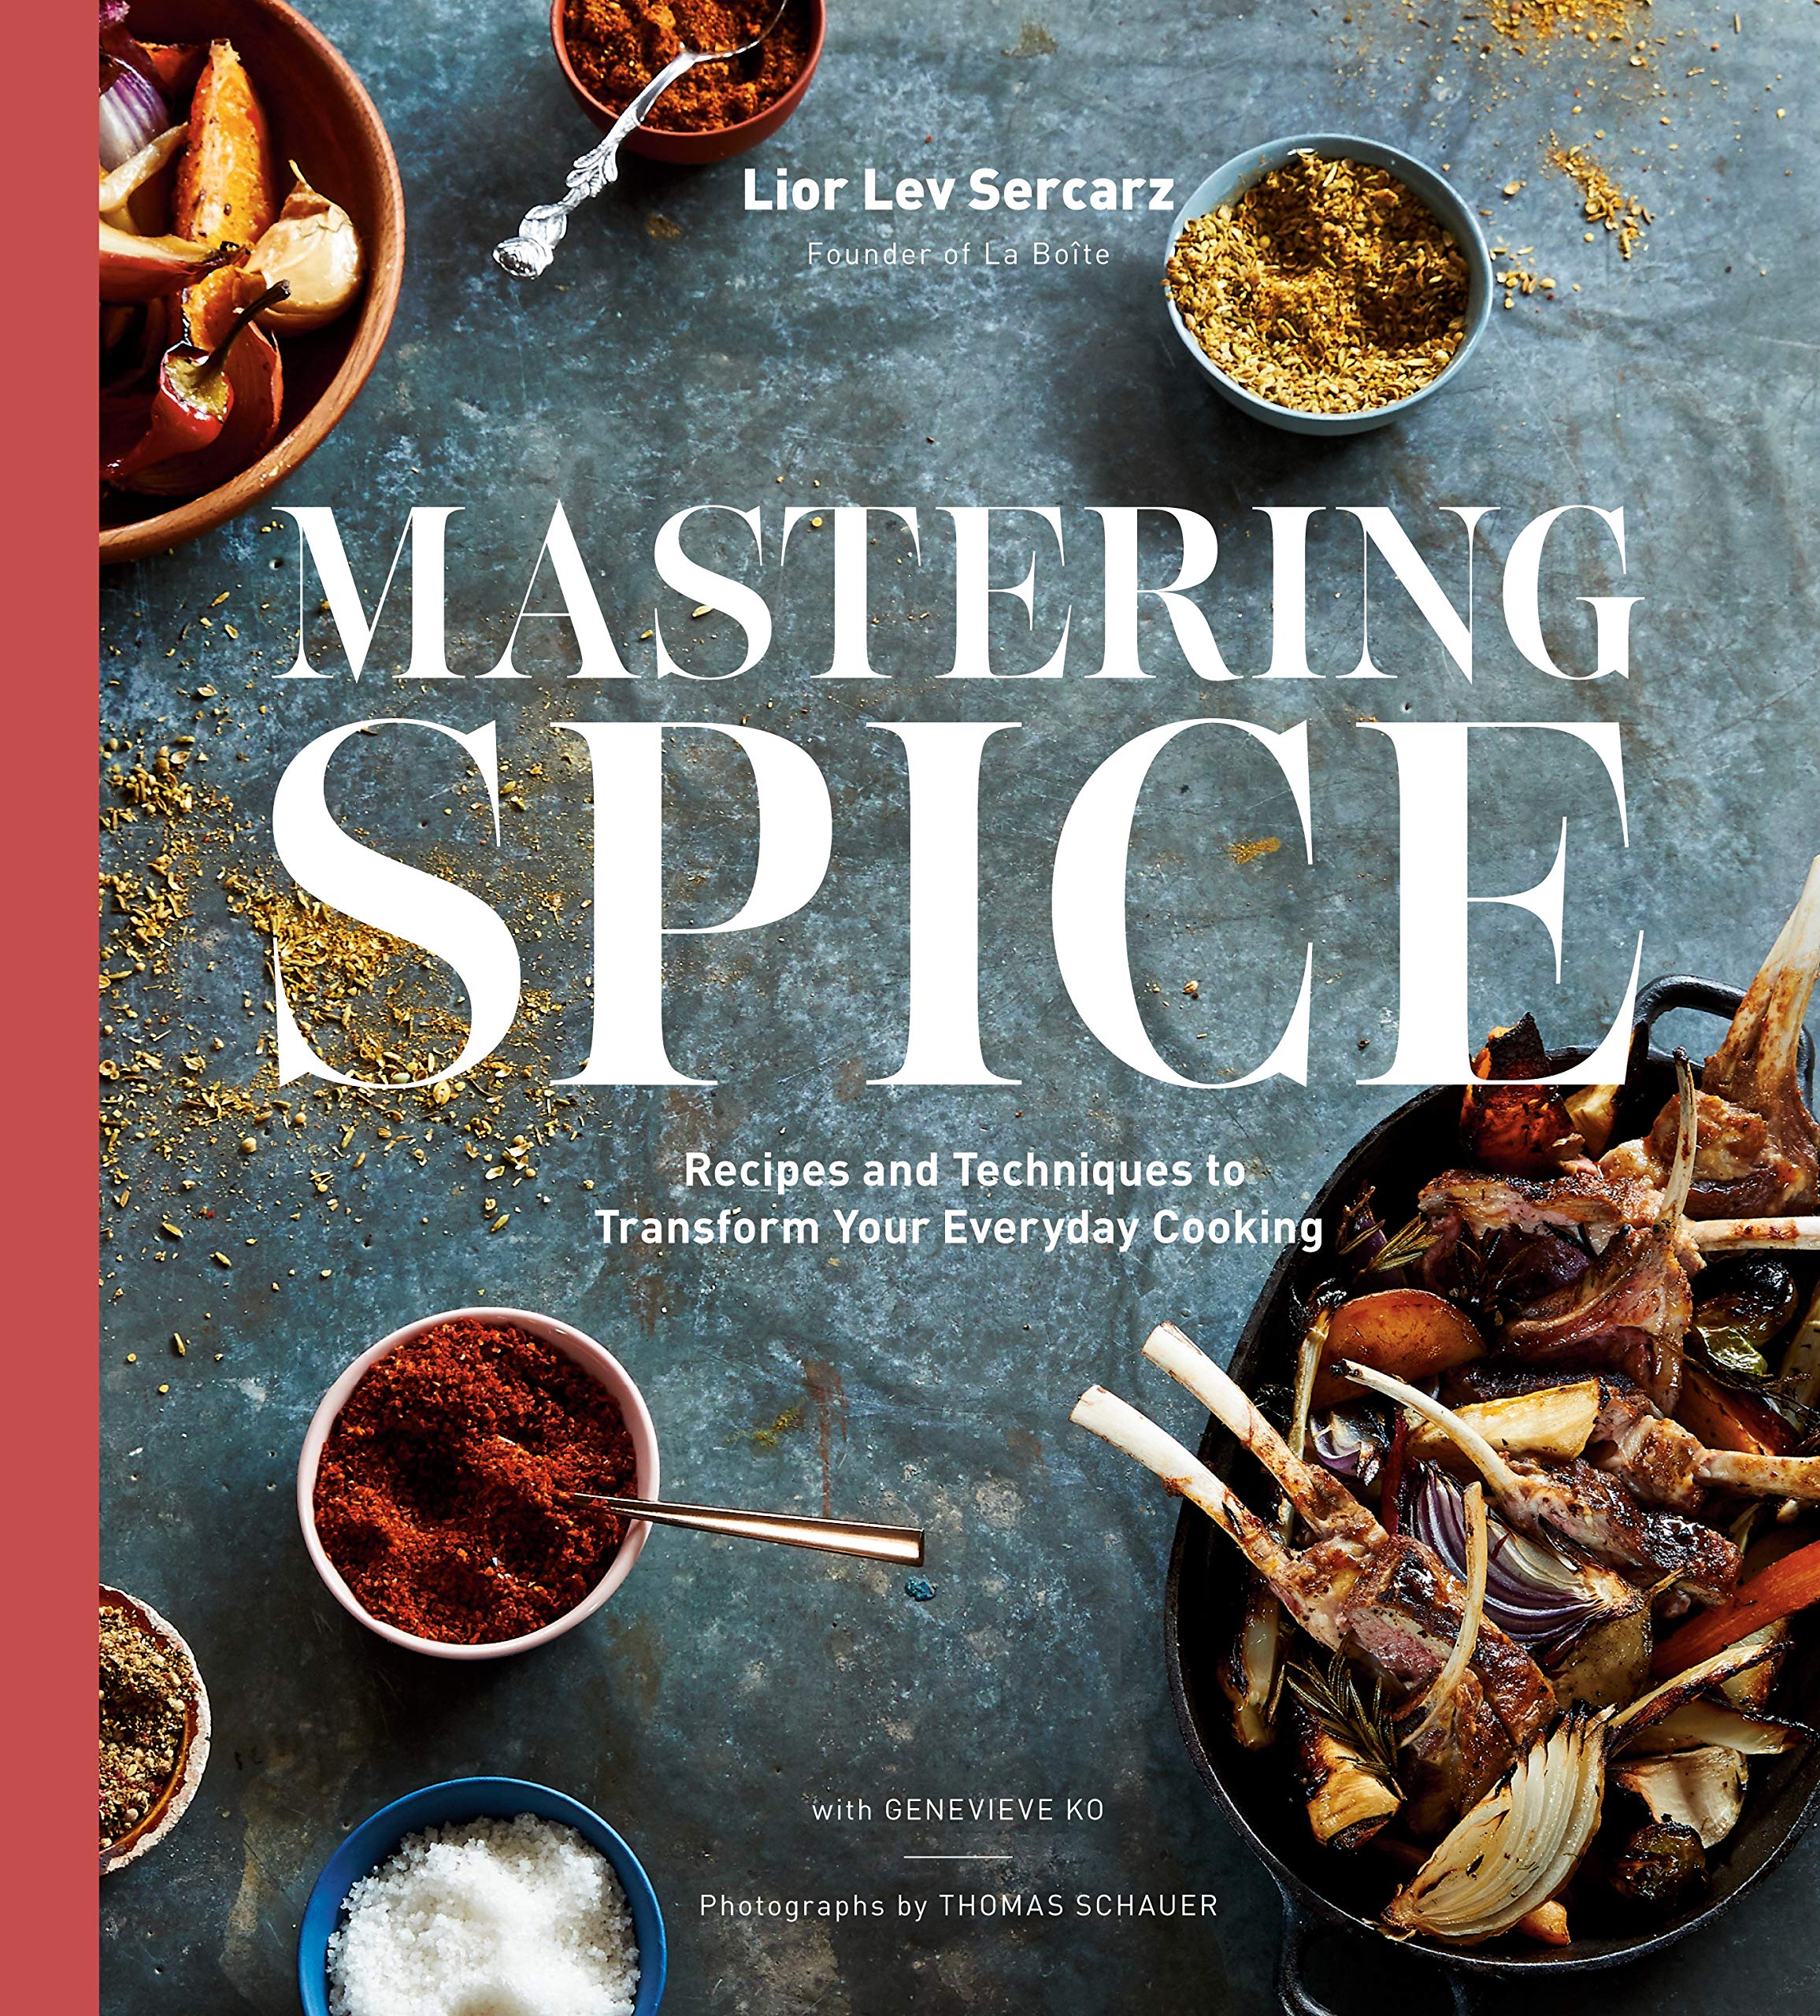 Mastering Spice: Recipes and Techniques to Transform Your Everyday Cooking (Lior Lev Sercarz) *Signed*